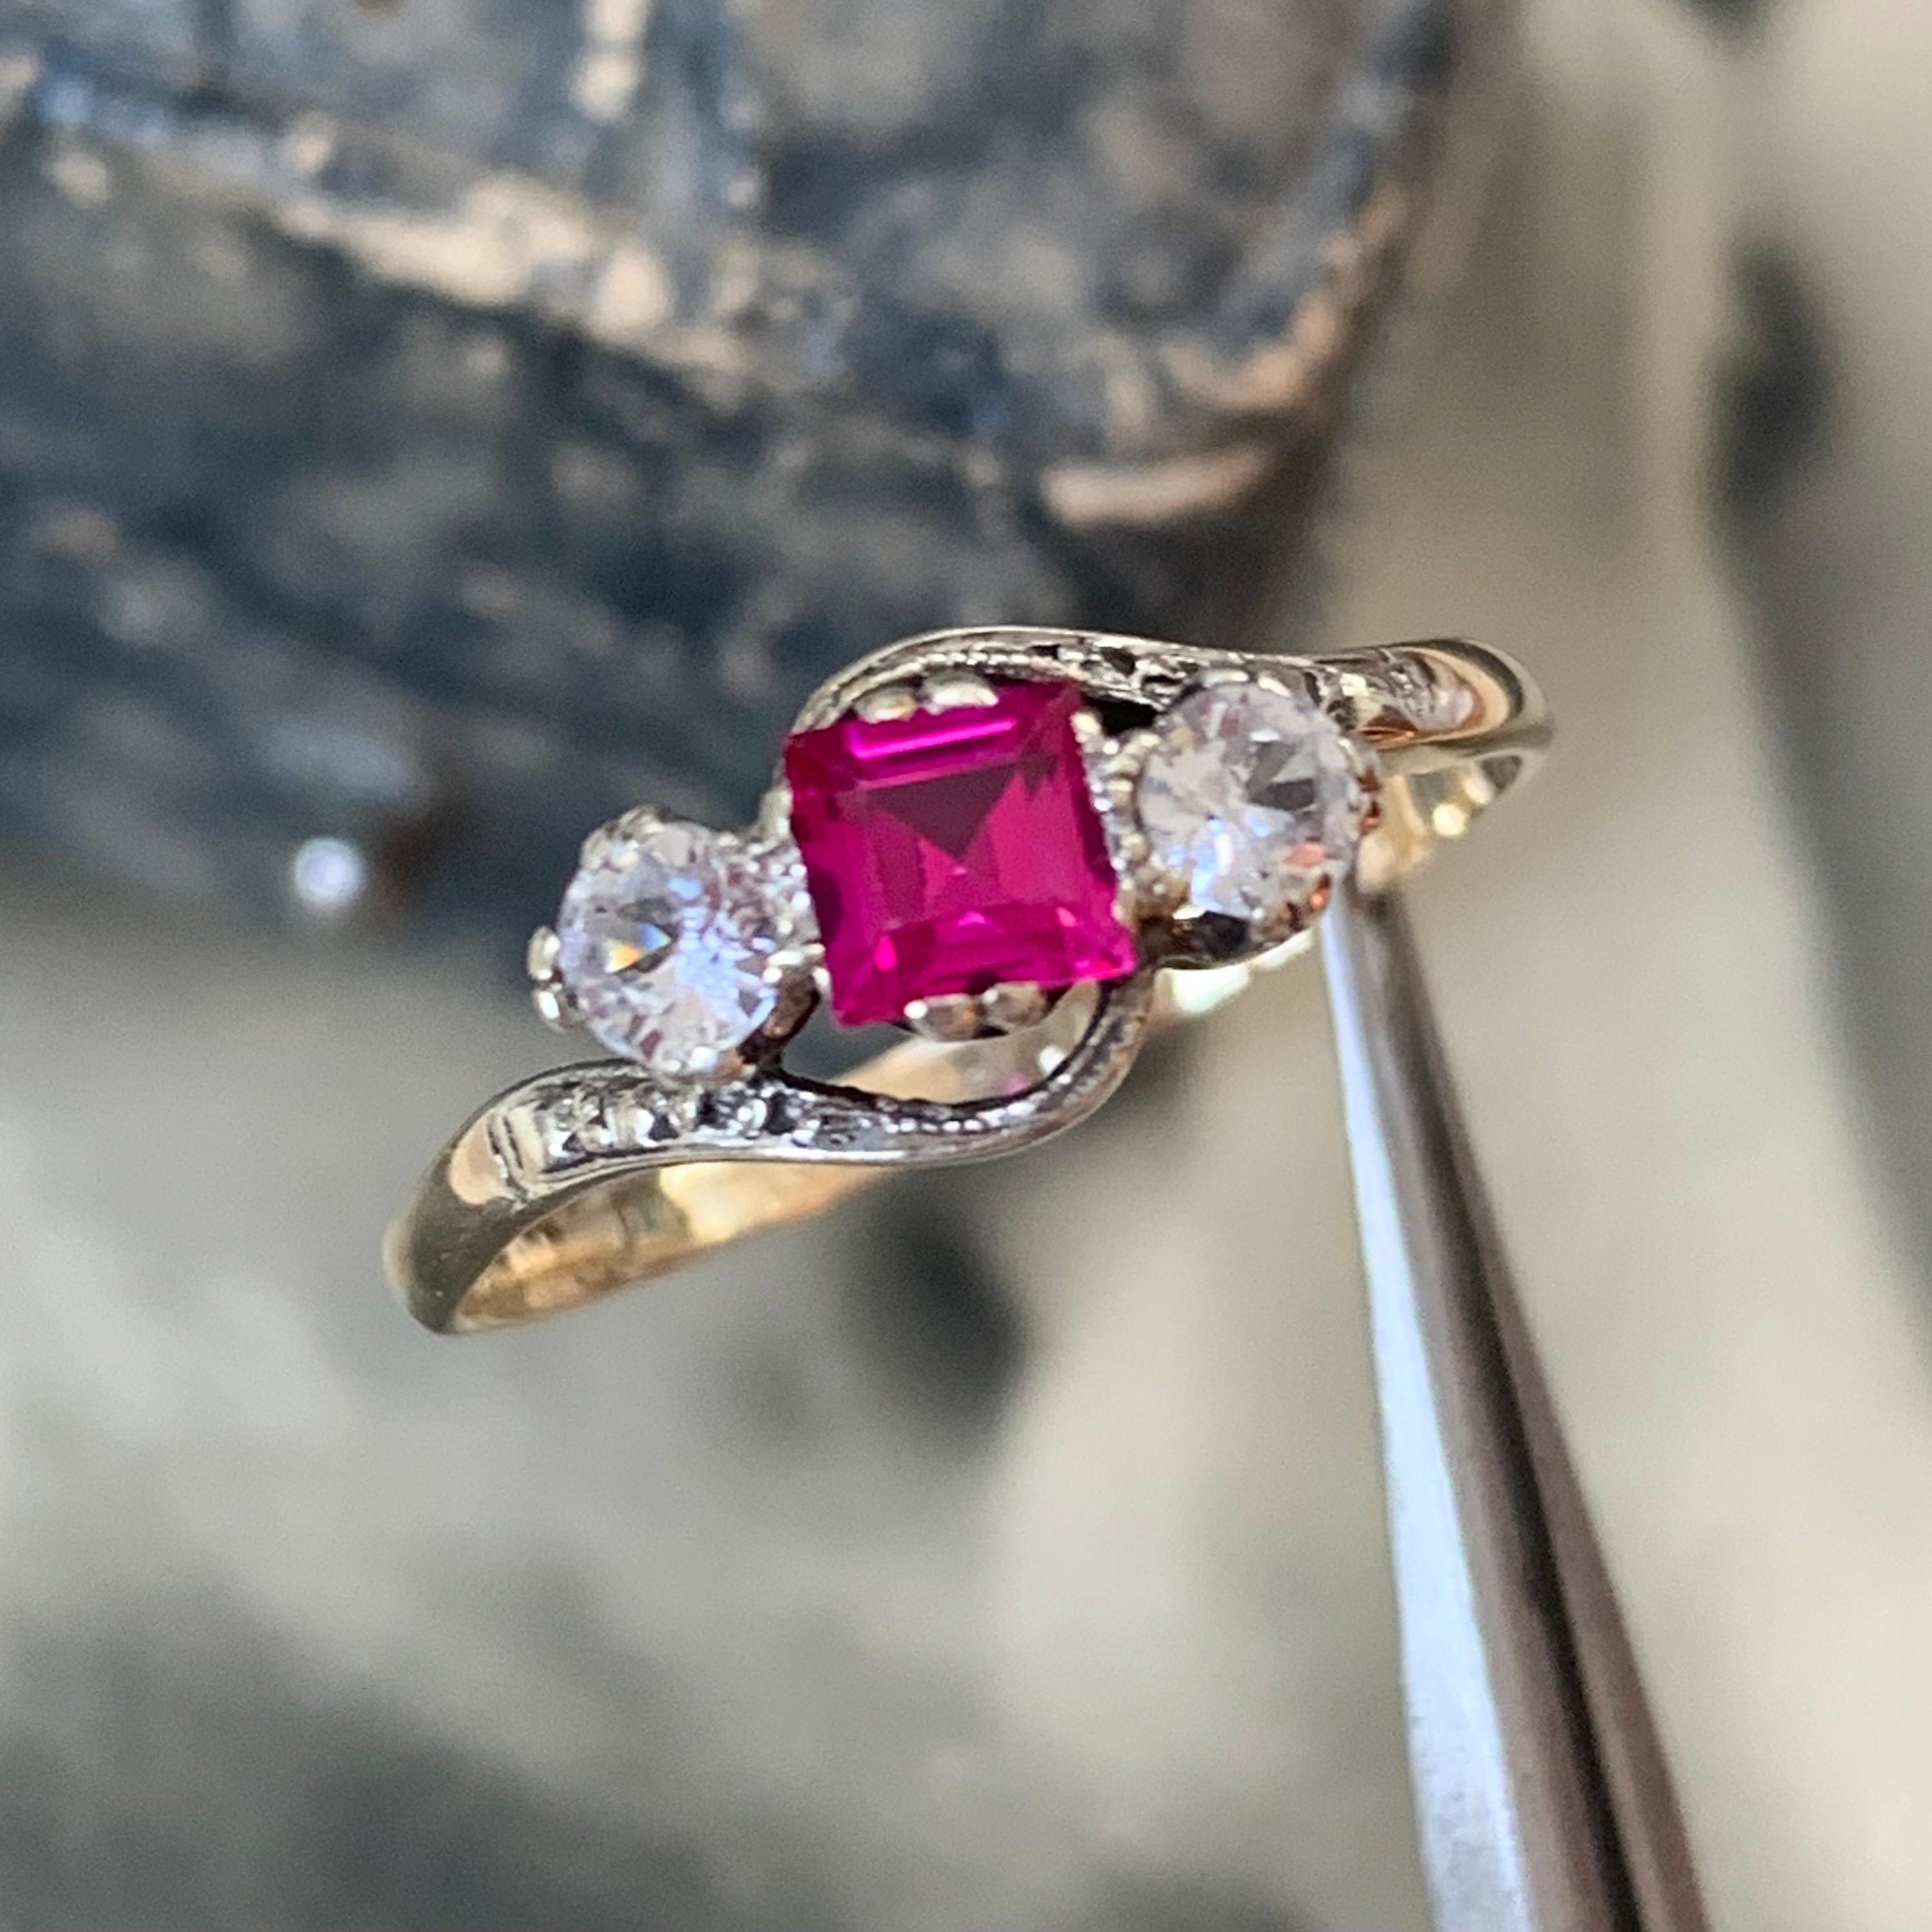 Art Deco Ruby Trilogy Ring Set in Platinum & 9Ct Gold. Beautiful Square Cut With White Sapphires Either Side